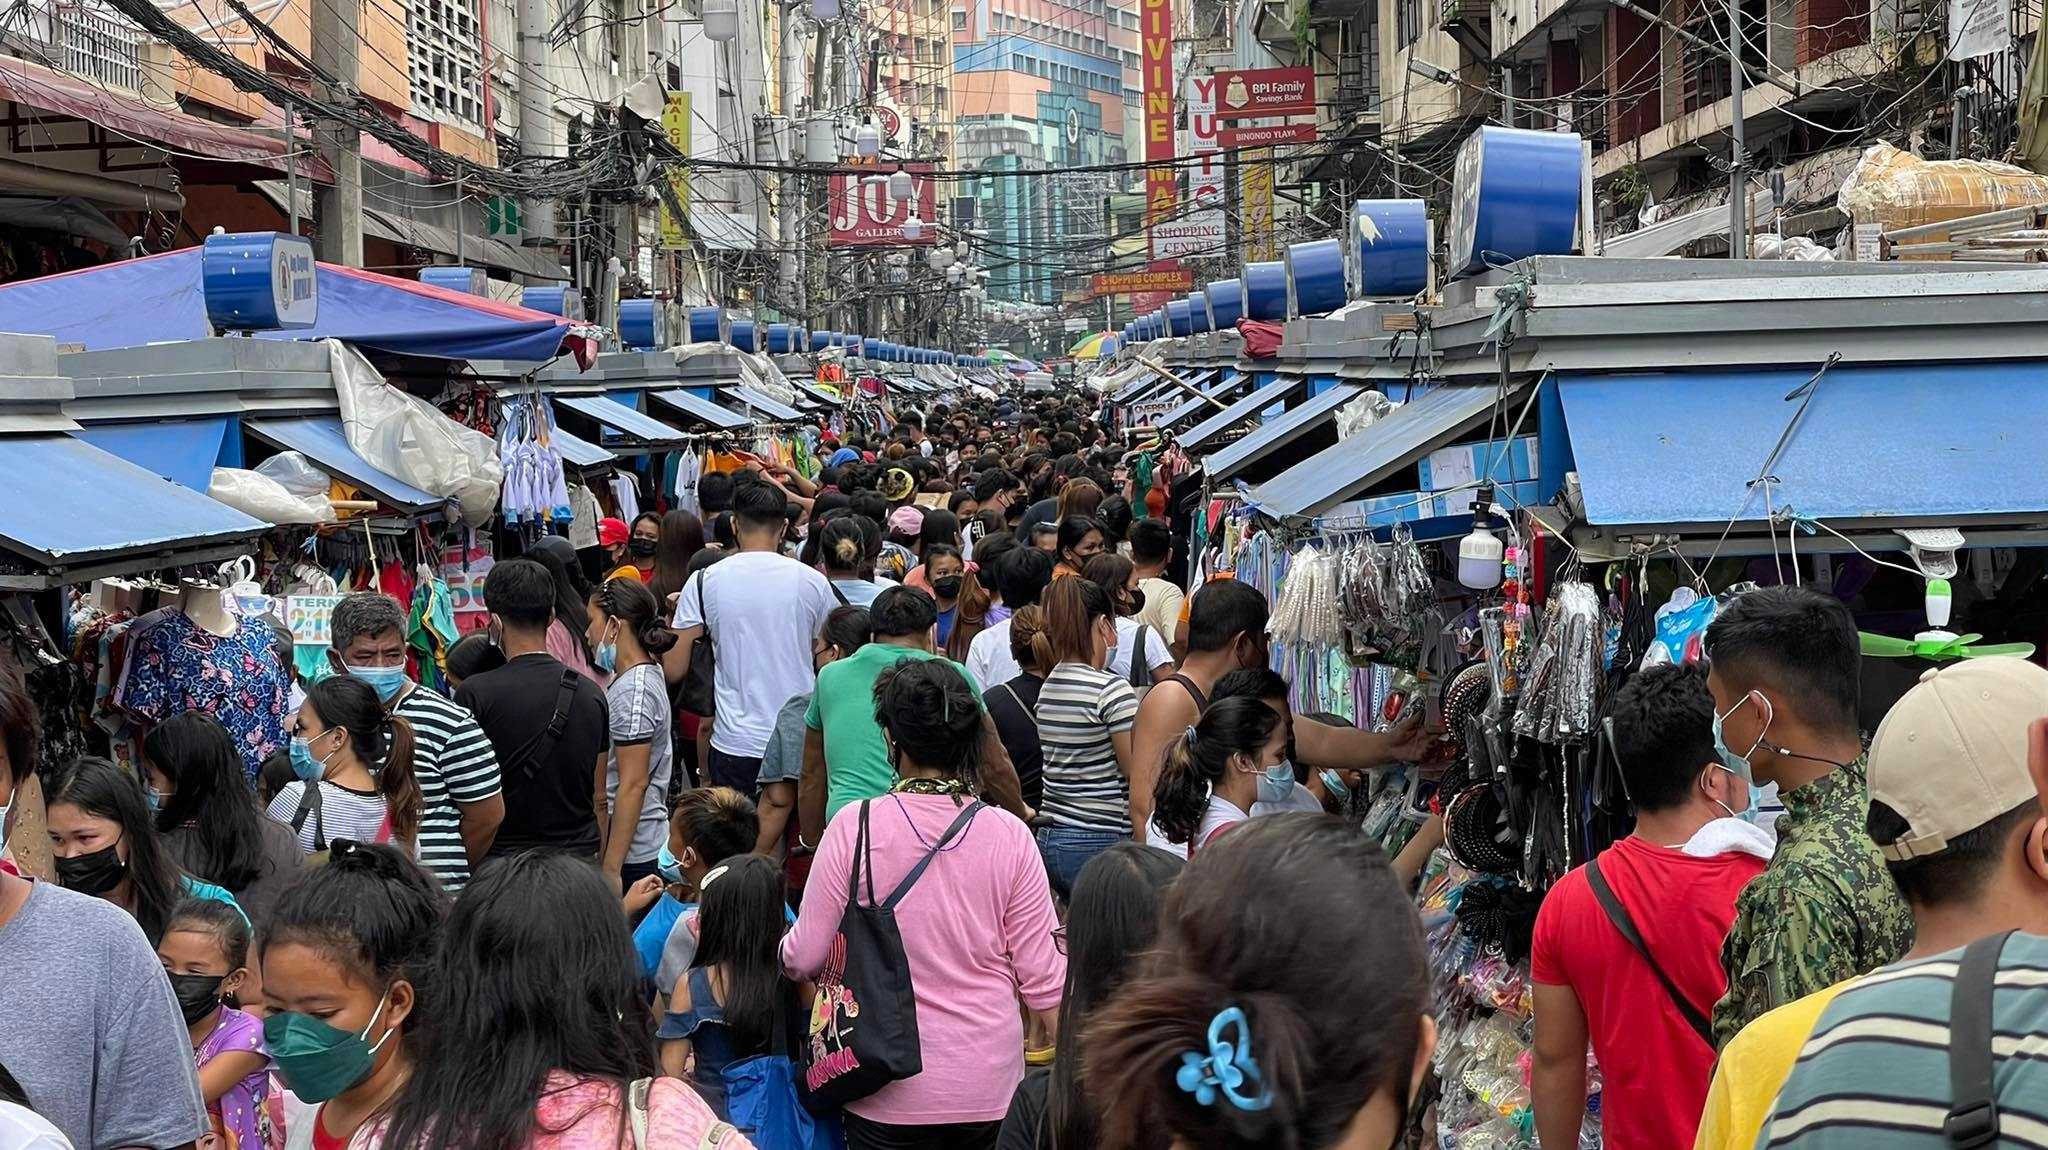 Many Filipino adults believe their quality of life remain unchanged - SWS poll